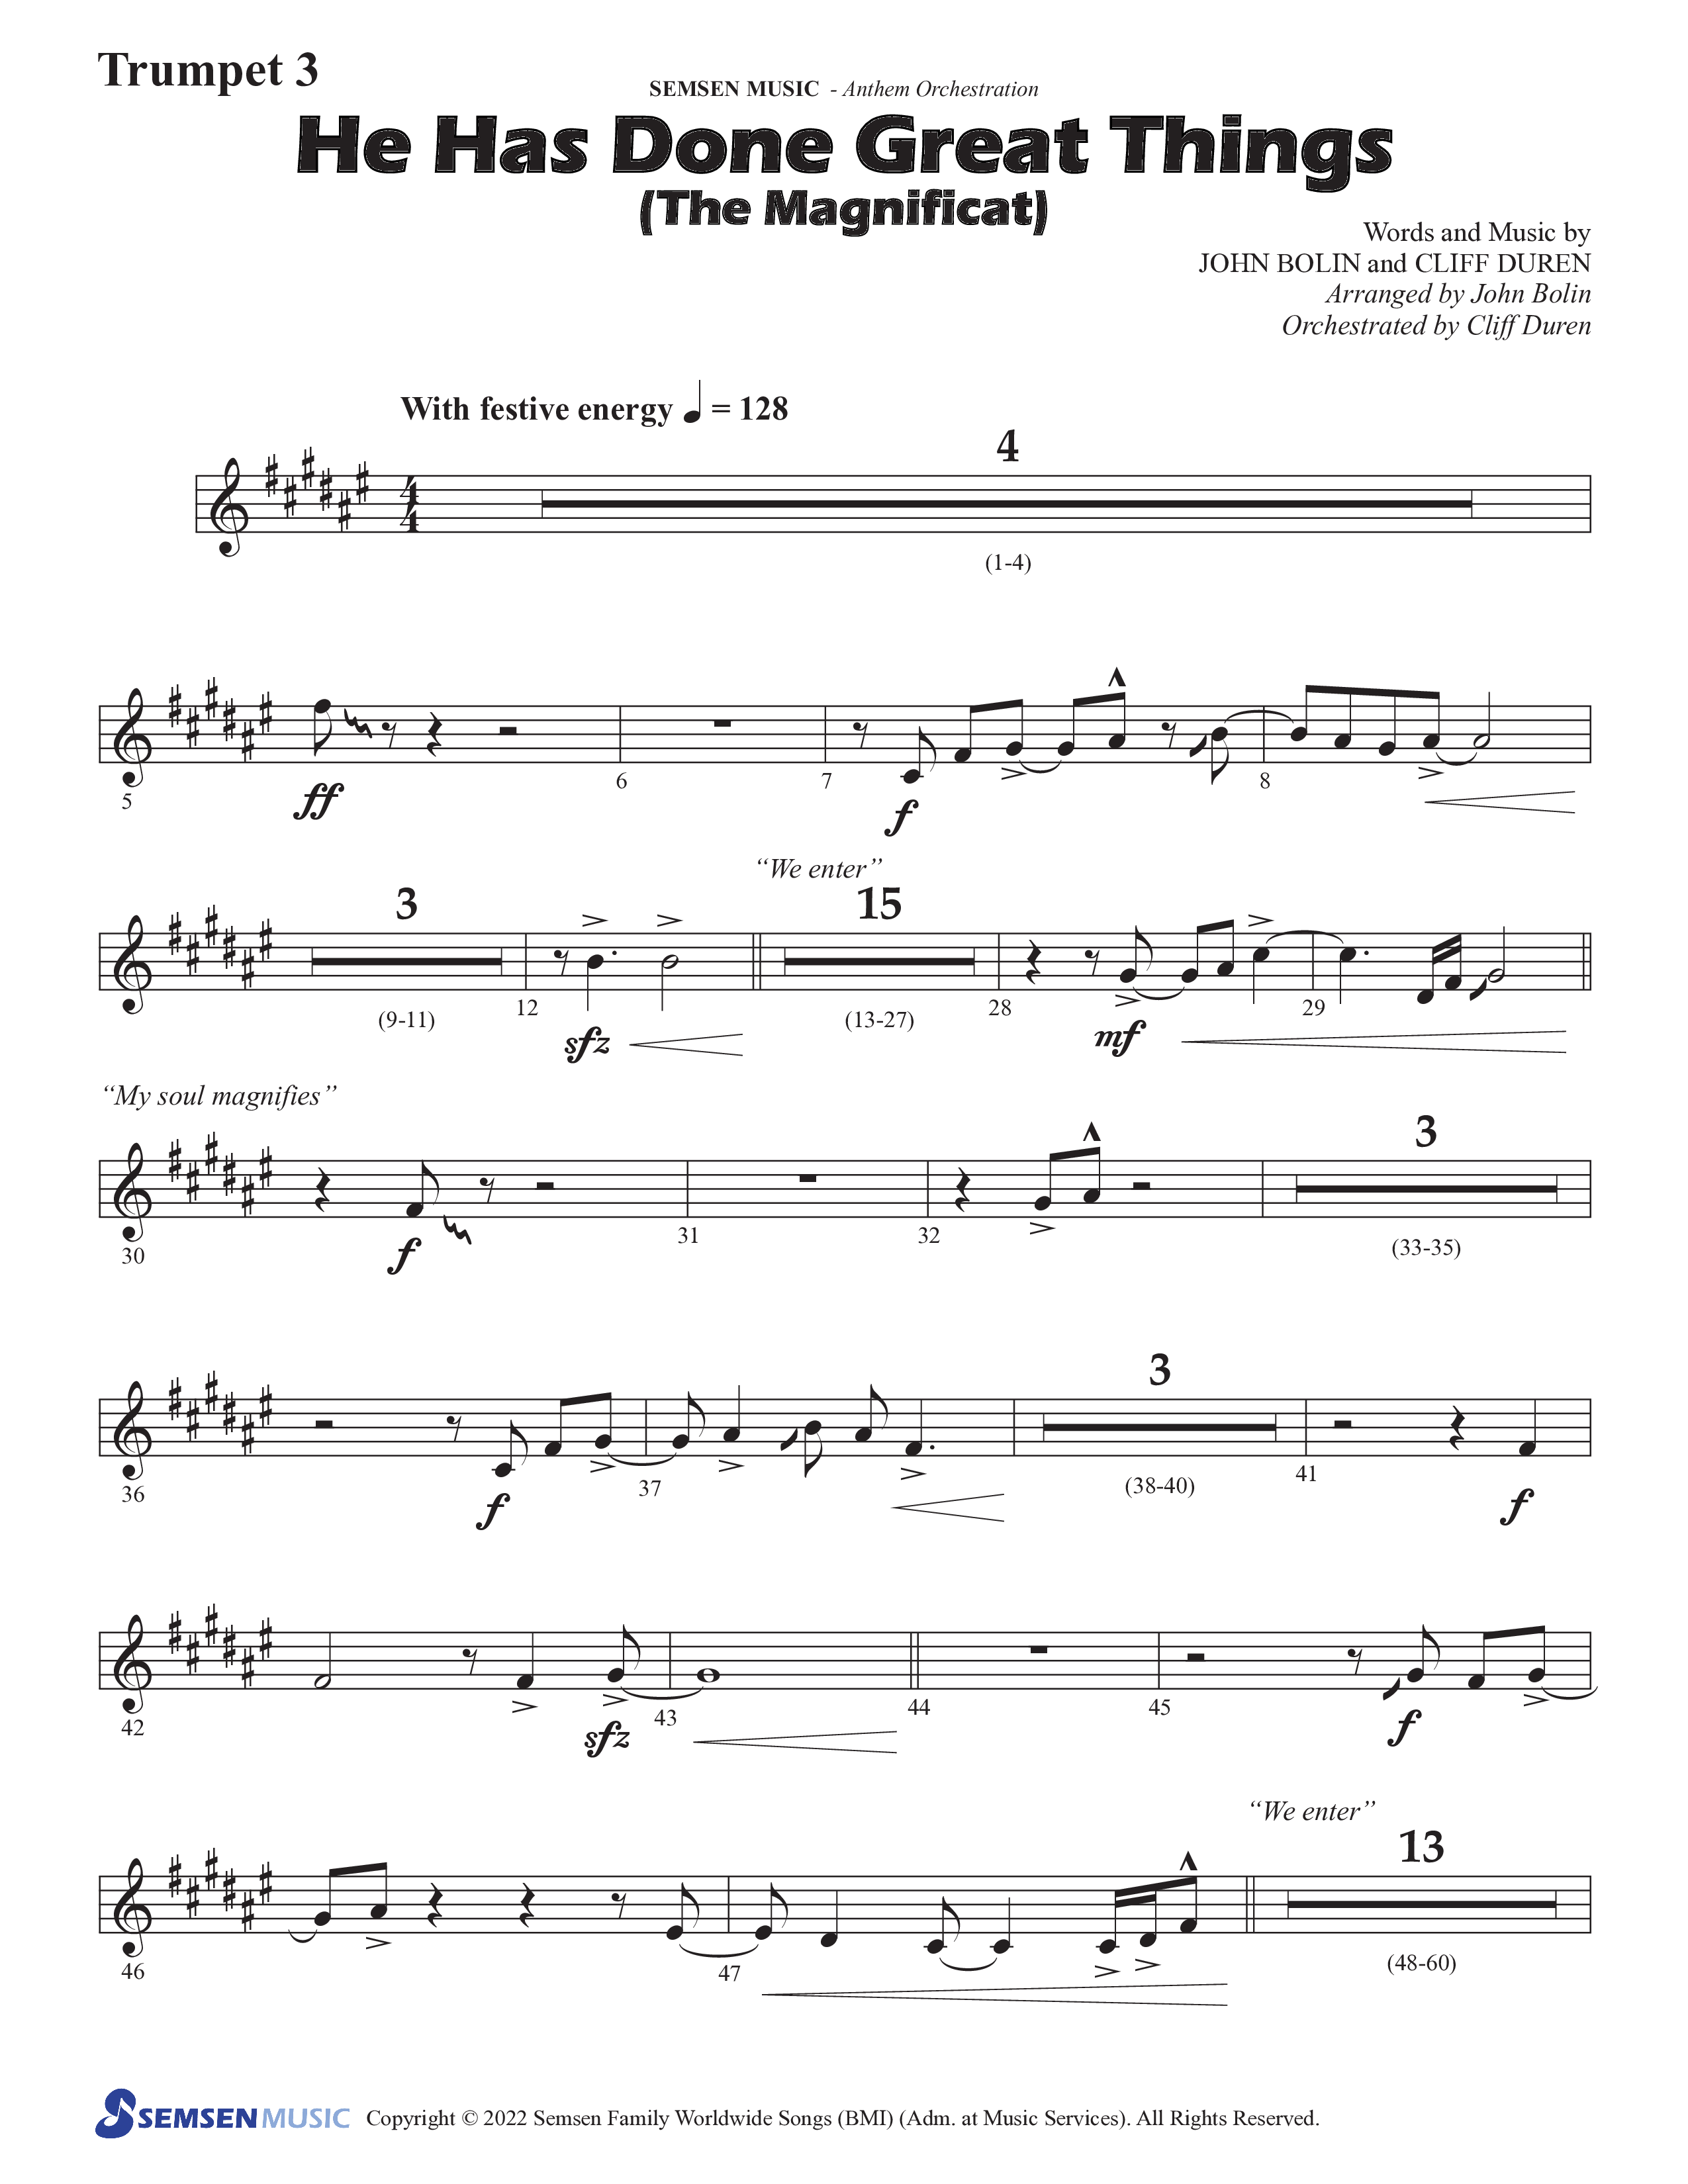 He Has Done Great Things (The Magnificat) (Choral Anthem SATB) Trumpet 3 (Semsen Music / Arr. John Bolin / Orch. Cliff Duren)